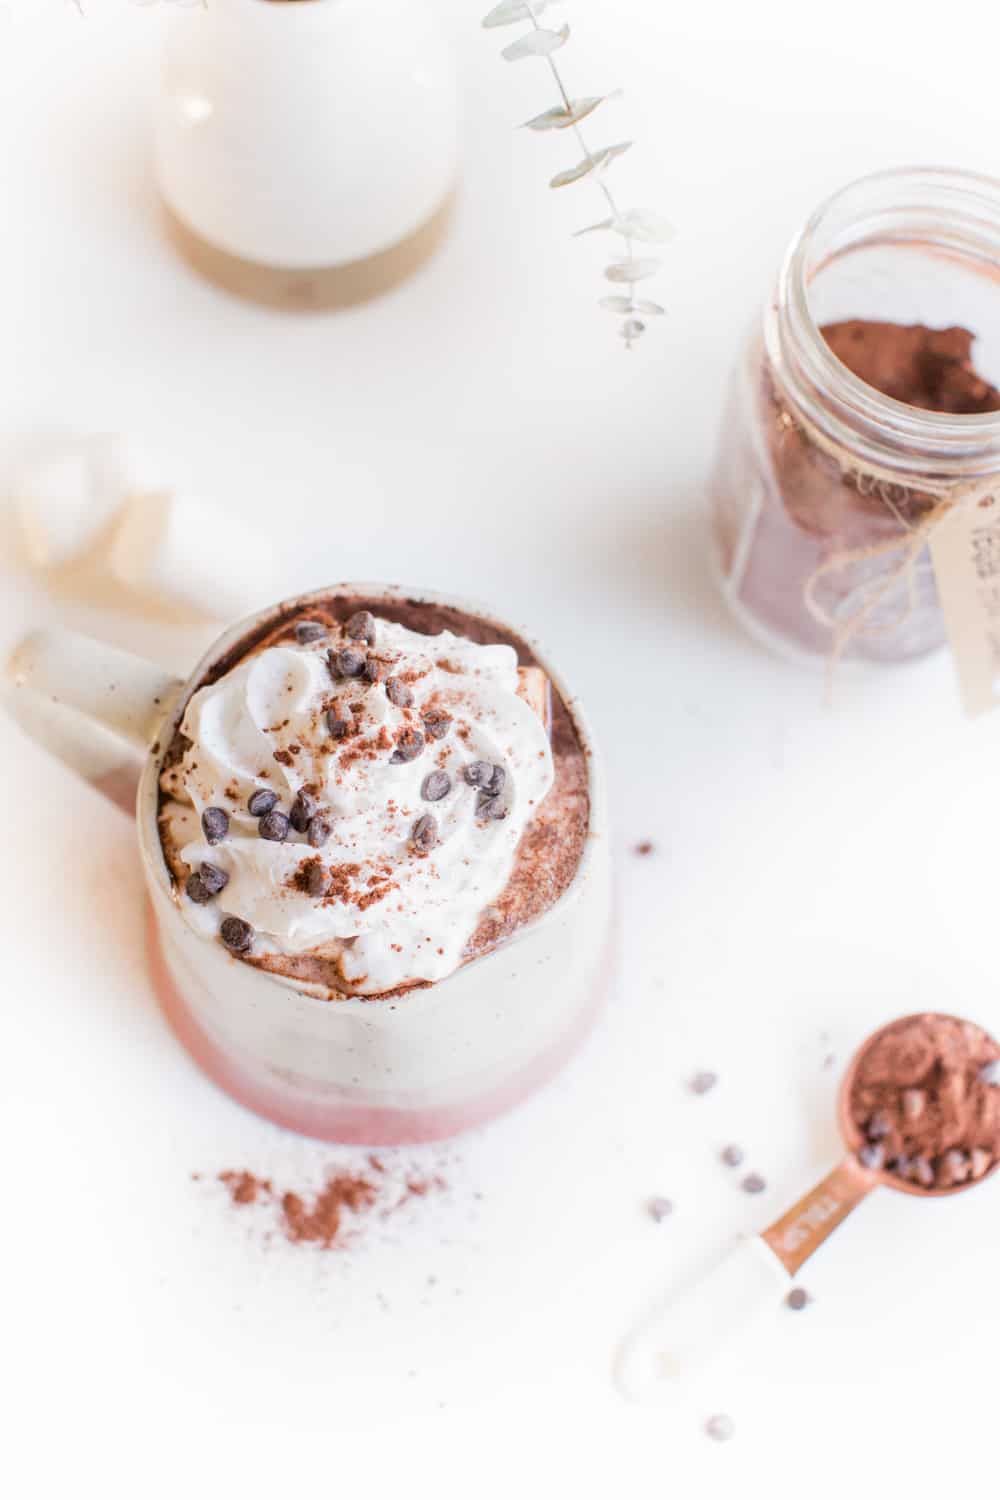 mug of hot cocoa with soy whipped cream and chocolate chips on top.